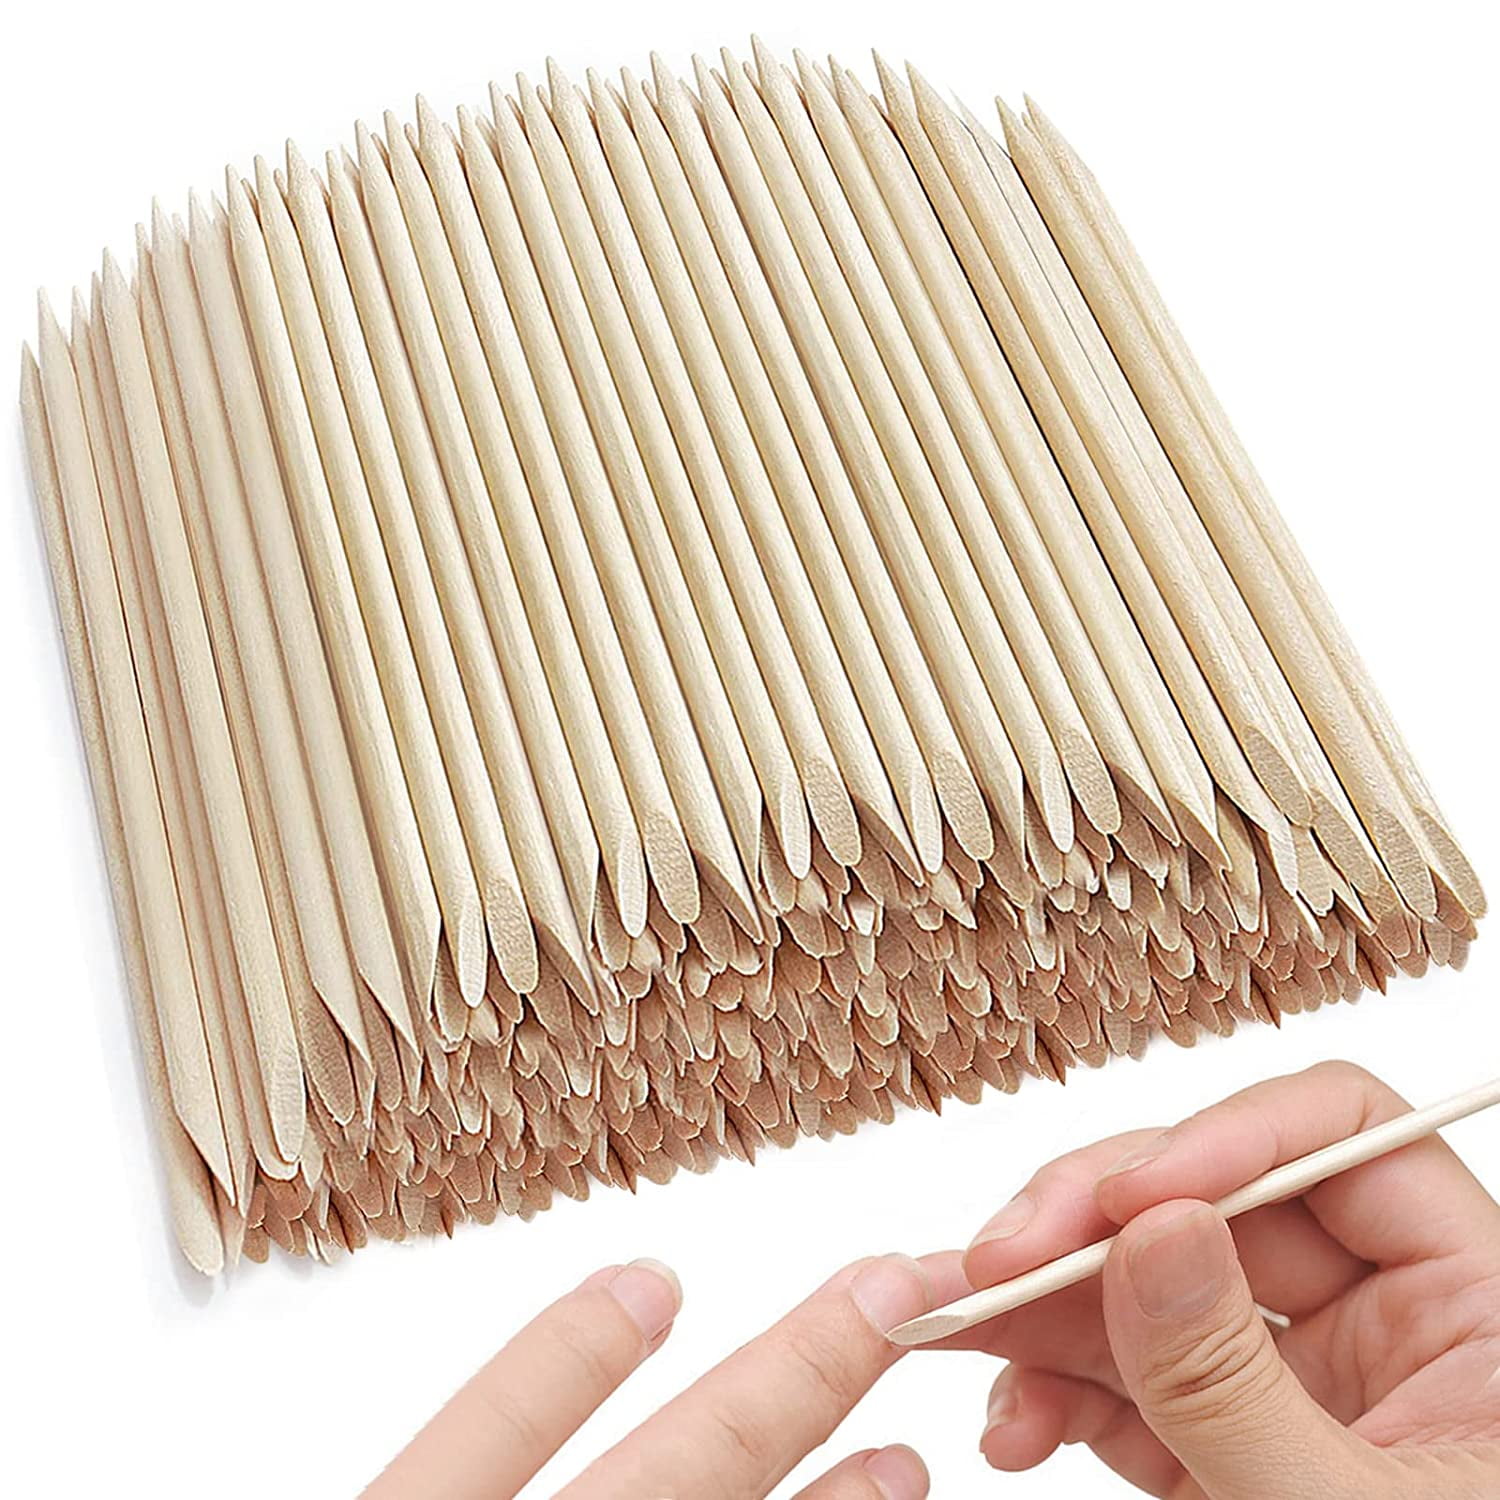 Orangewood Sticks - Pack of 10 - Accessories & Tools from Naio Nails UK